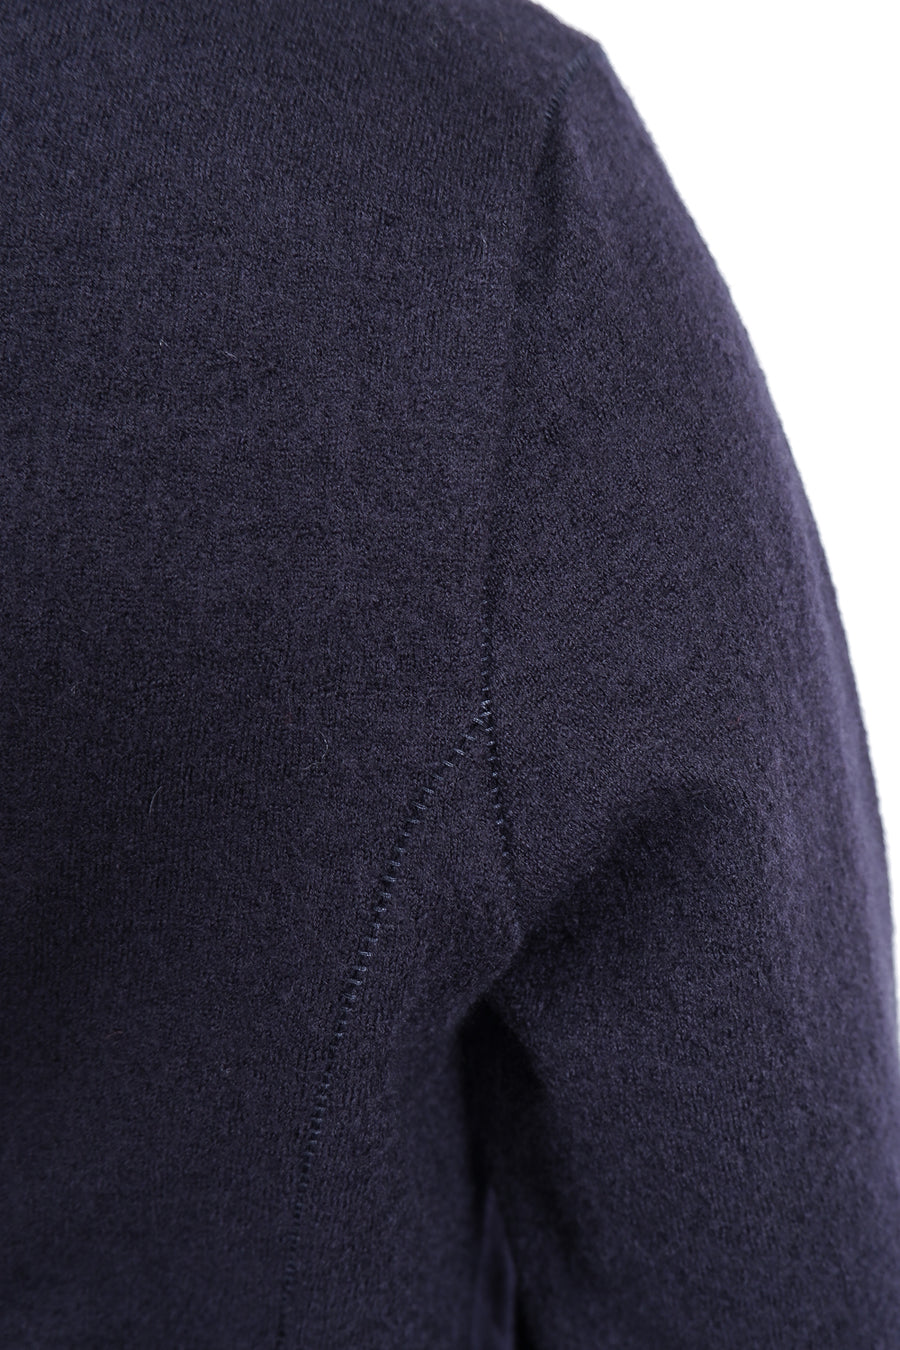 Buy the Hannes Roether Boiled Wool Roll Neck Knit Navy at Intro. Spend £50 for free UK delivery. Official stockists. We ship worldwide.